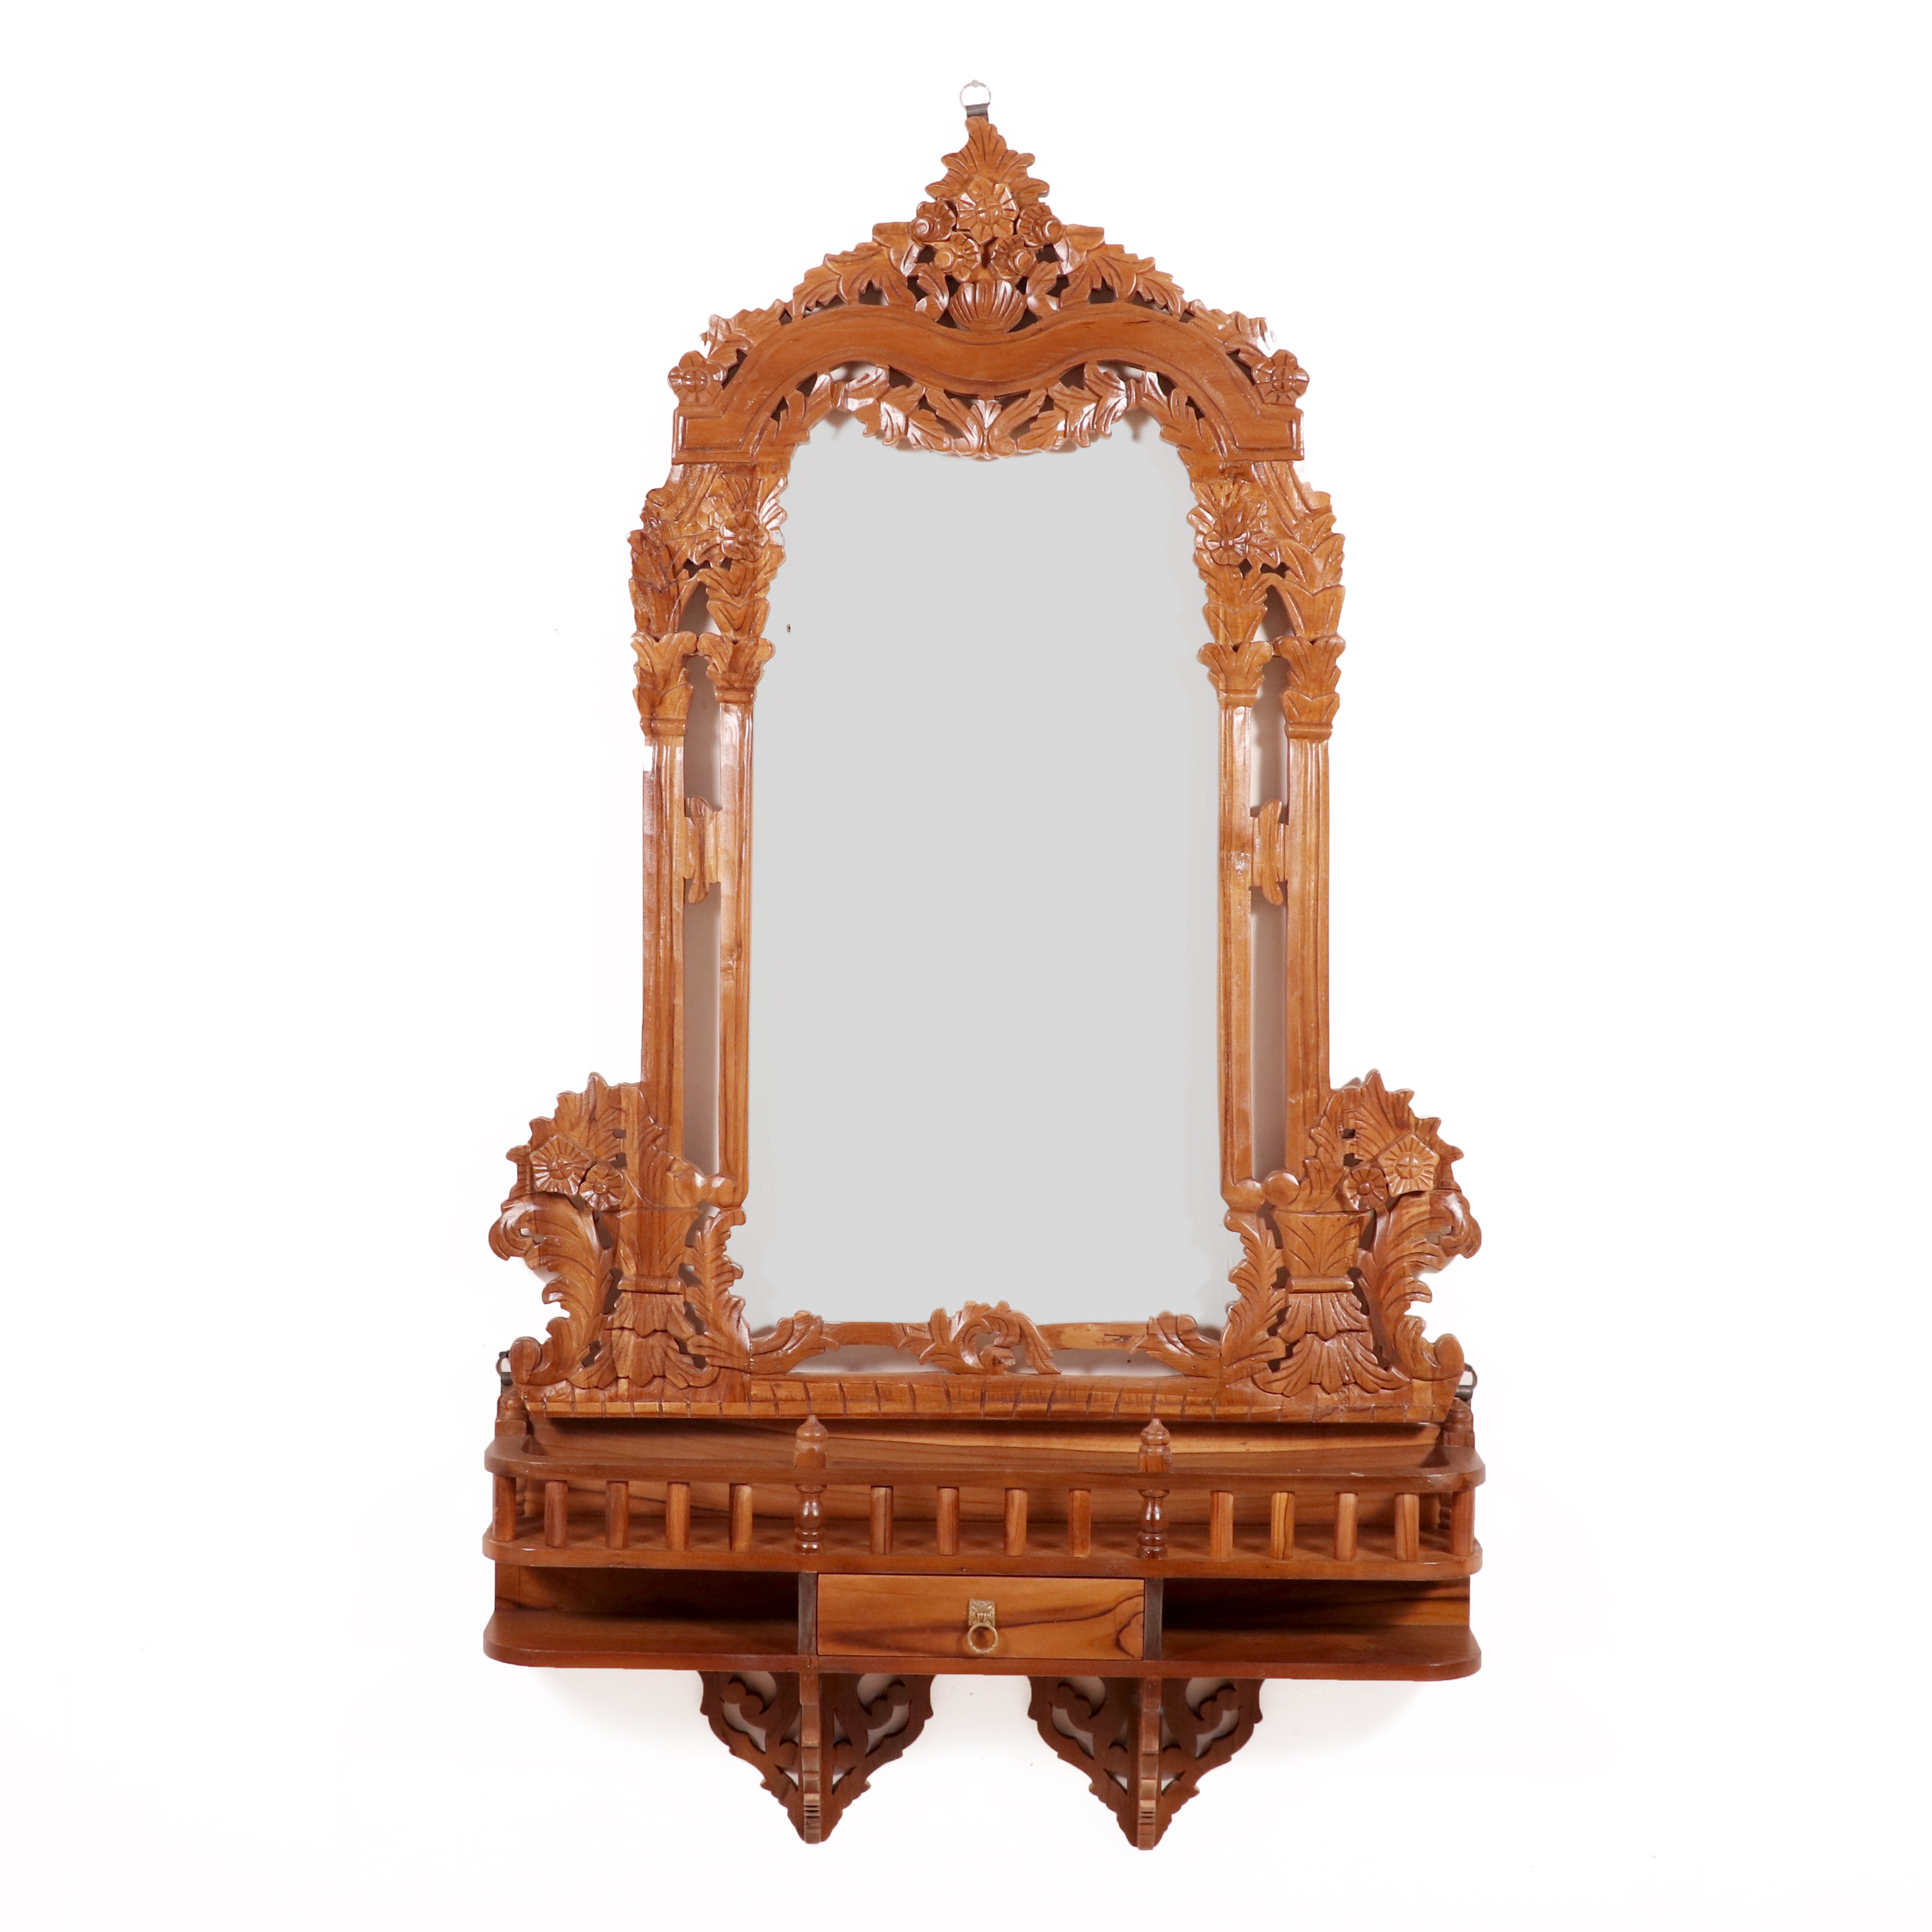 Traditional Teak Southern Minar Inspired Mirror Frame with 1 Drawer Mirror